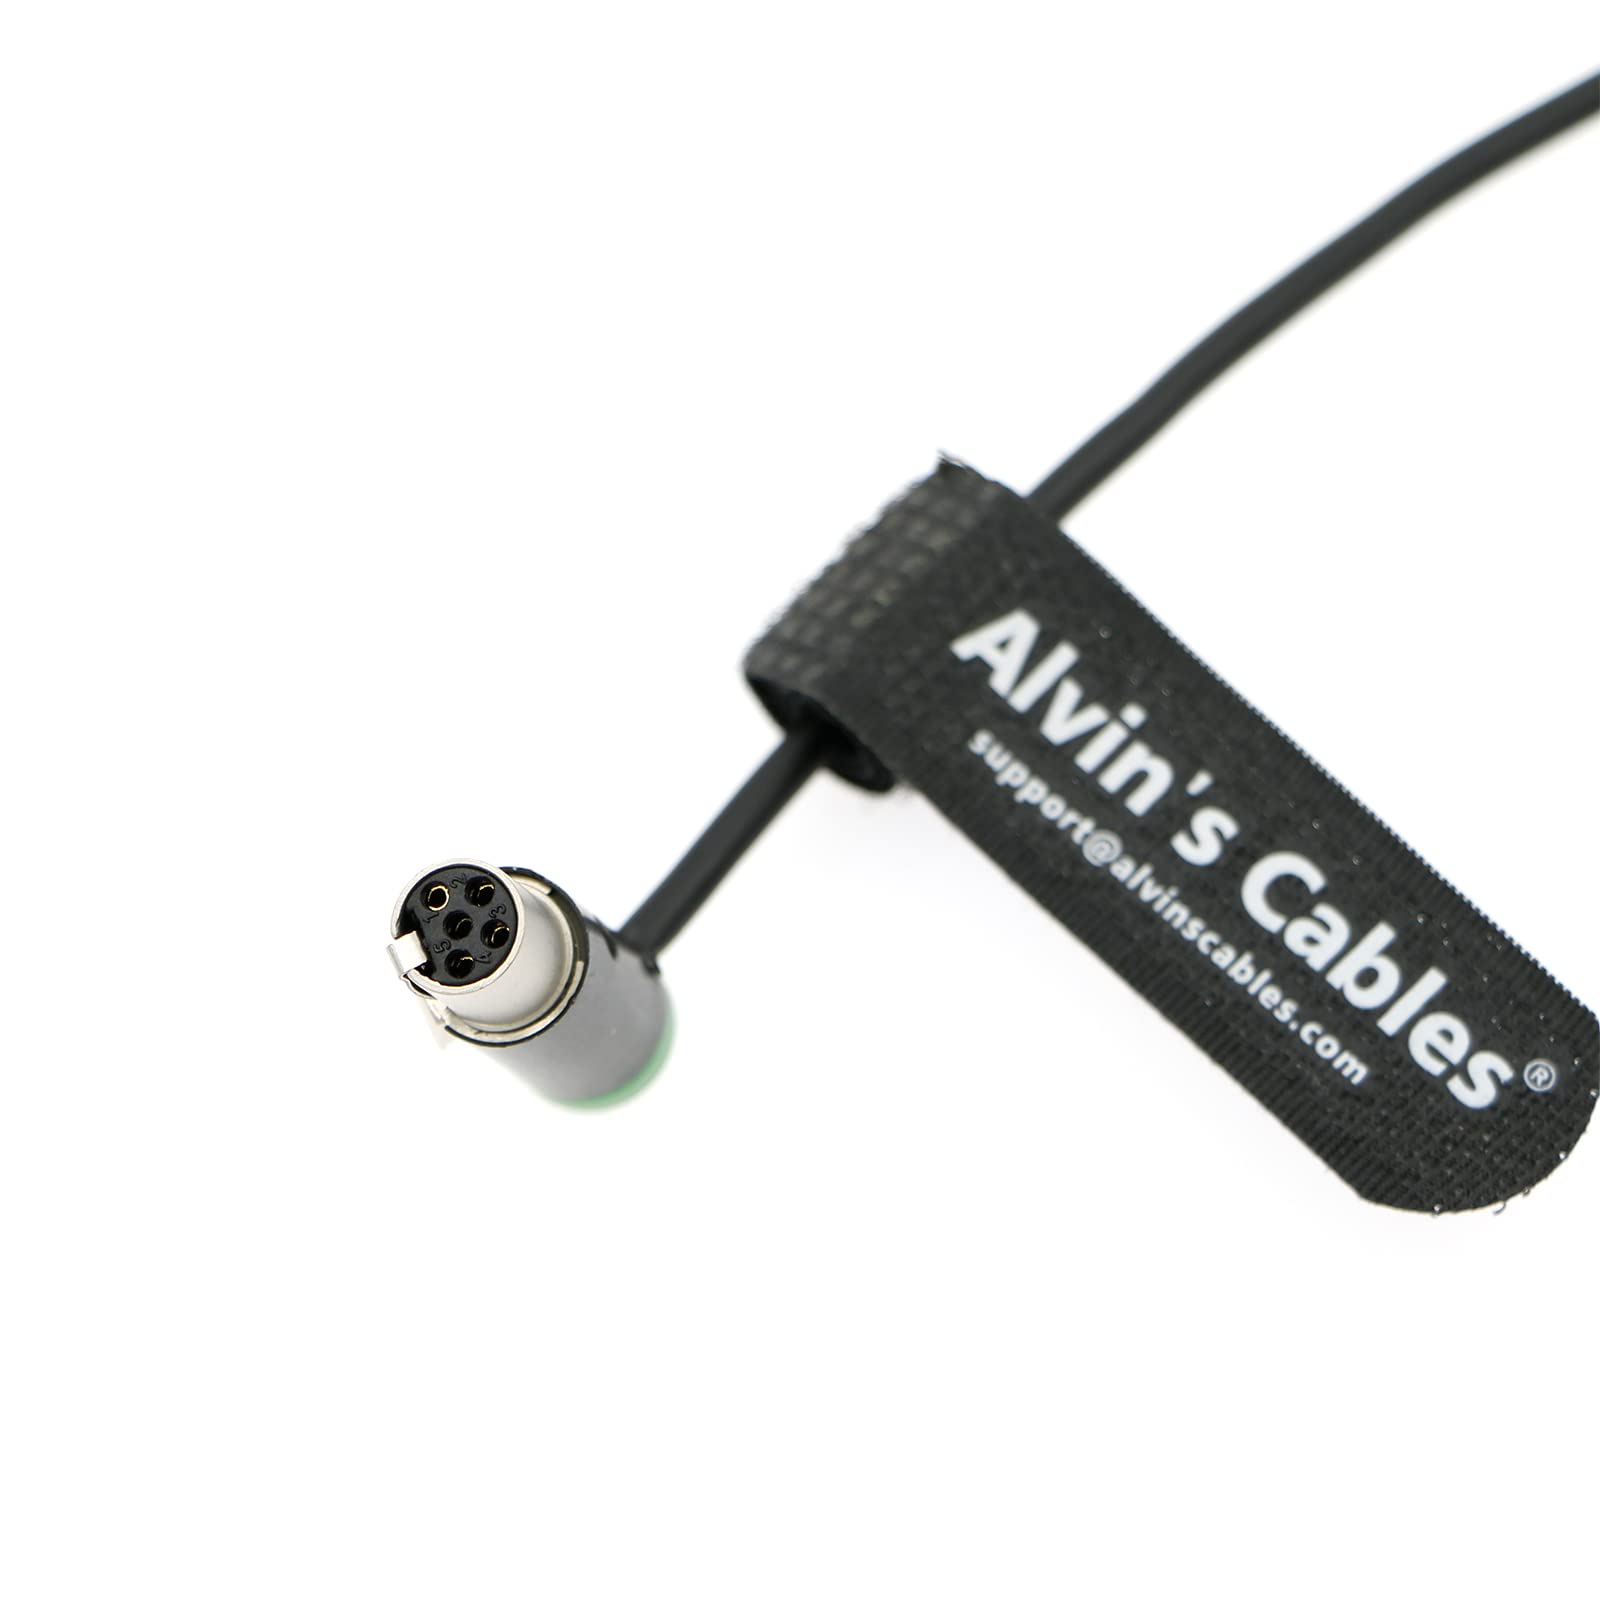 Alvin’s Cables Low-Profile TA5F to Dual LP XLR 3 Pin Male Audio-Cable for Wisycom-MCR54| Lectrosonics-DCHR-Receiver LP Mini XLR 5 Pin Female to Two XLR Output Splitter Cable for Sound Devices